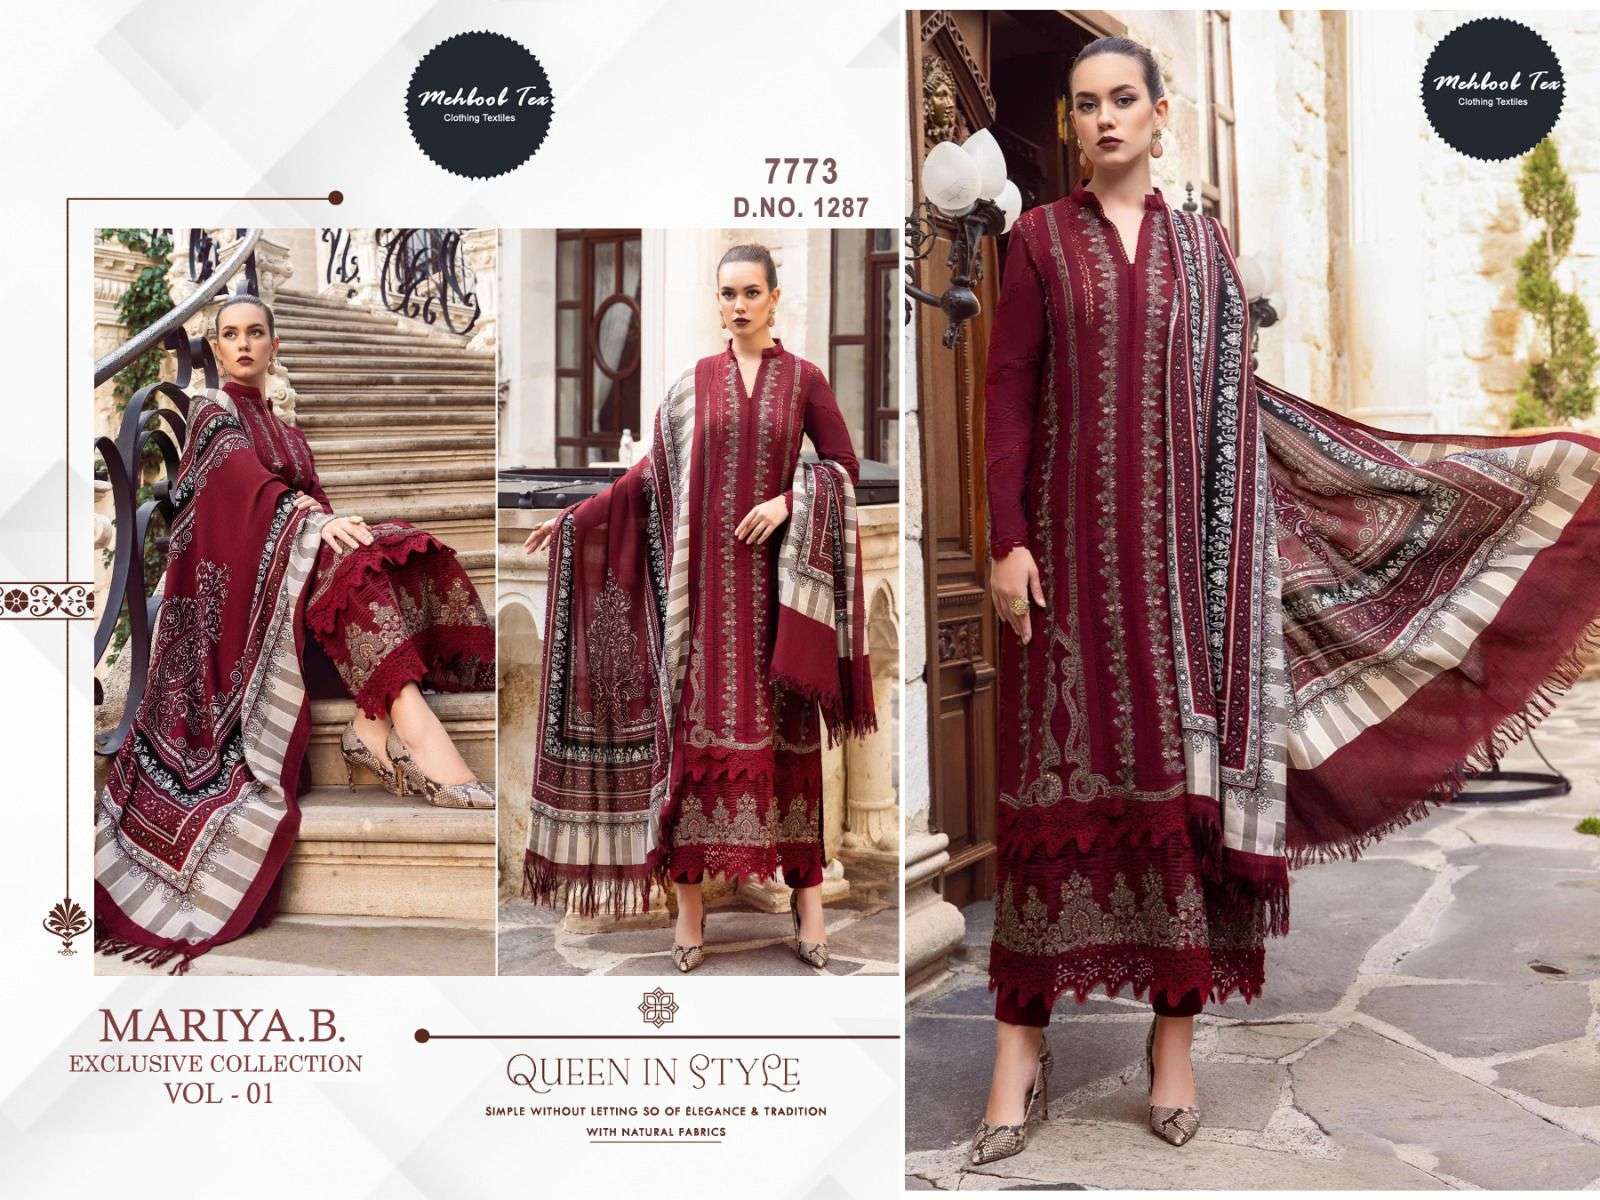 mehboob tex 1287 pure rayon cotton suit 